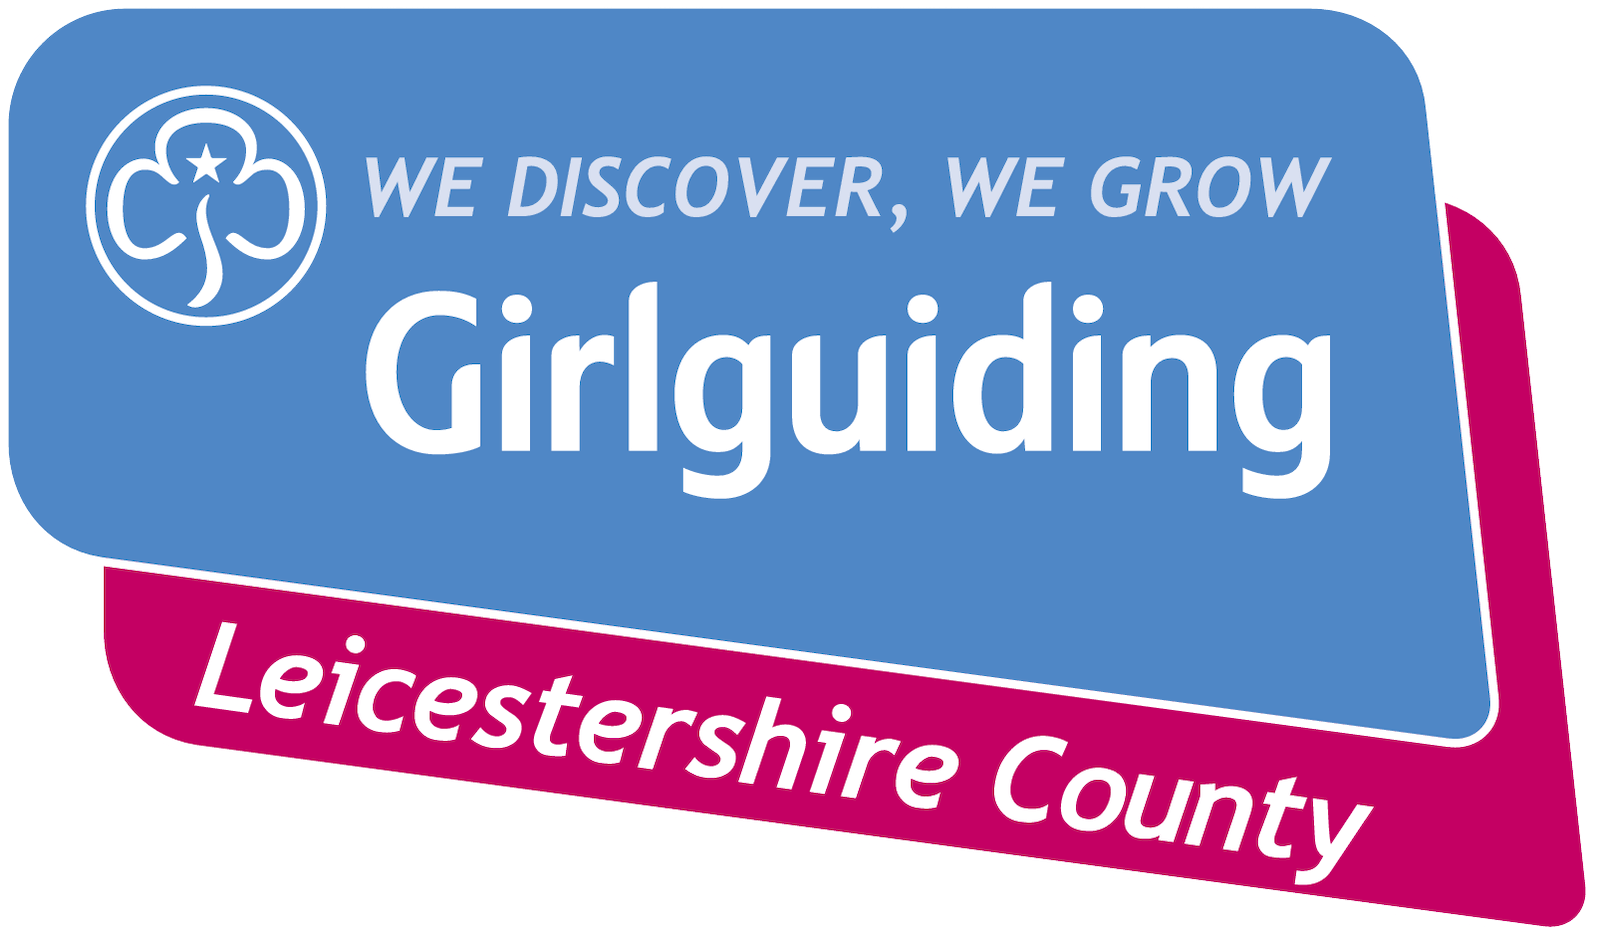 Leicestershire County logo (top left)